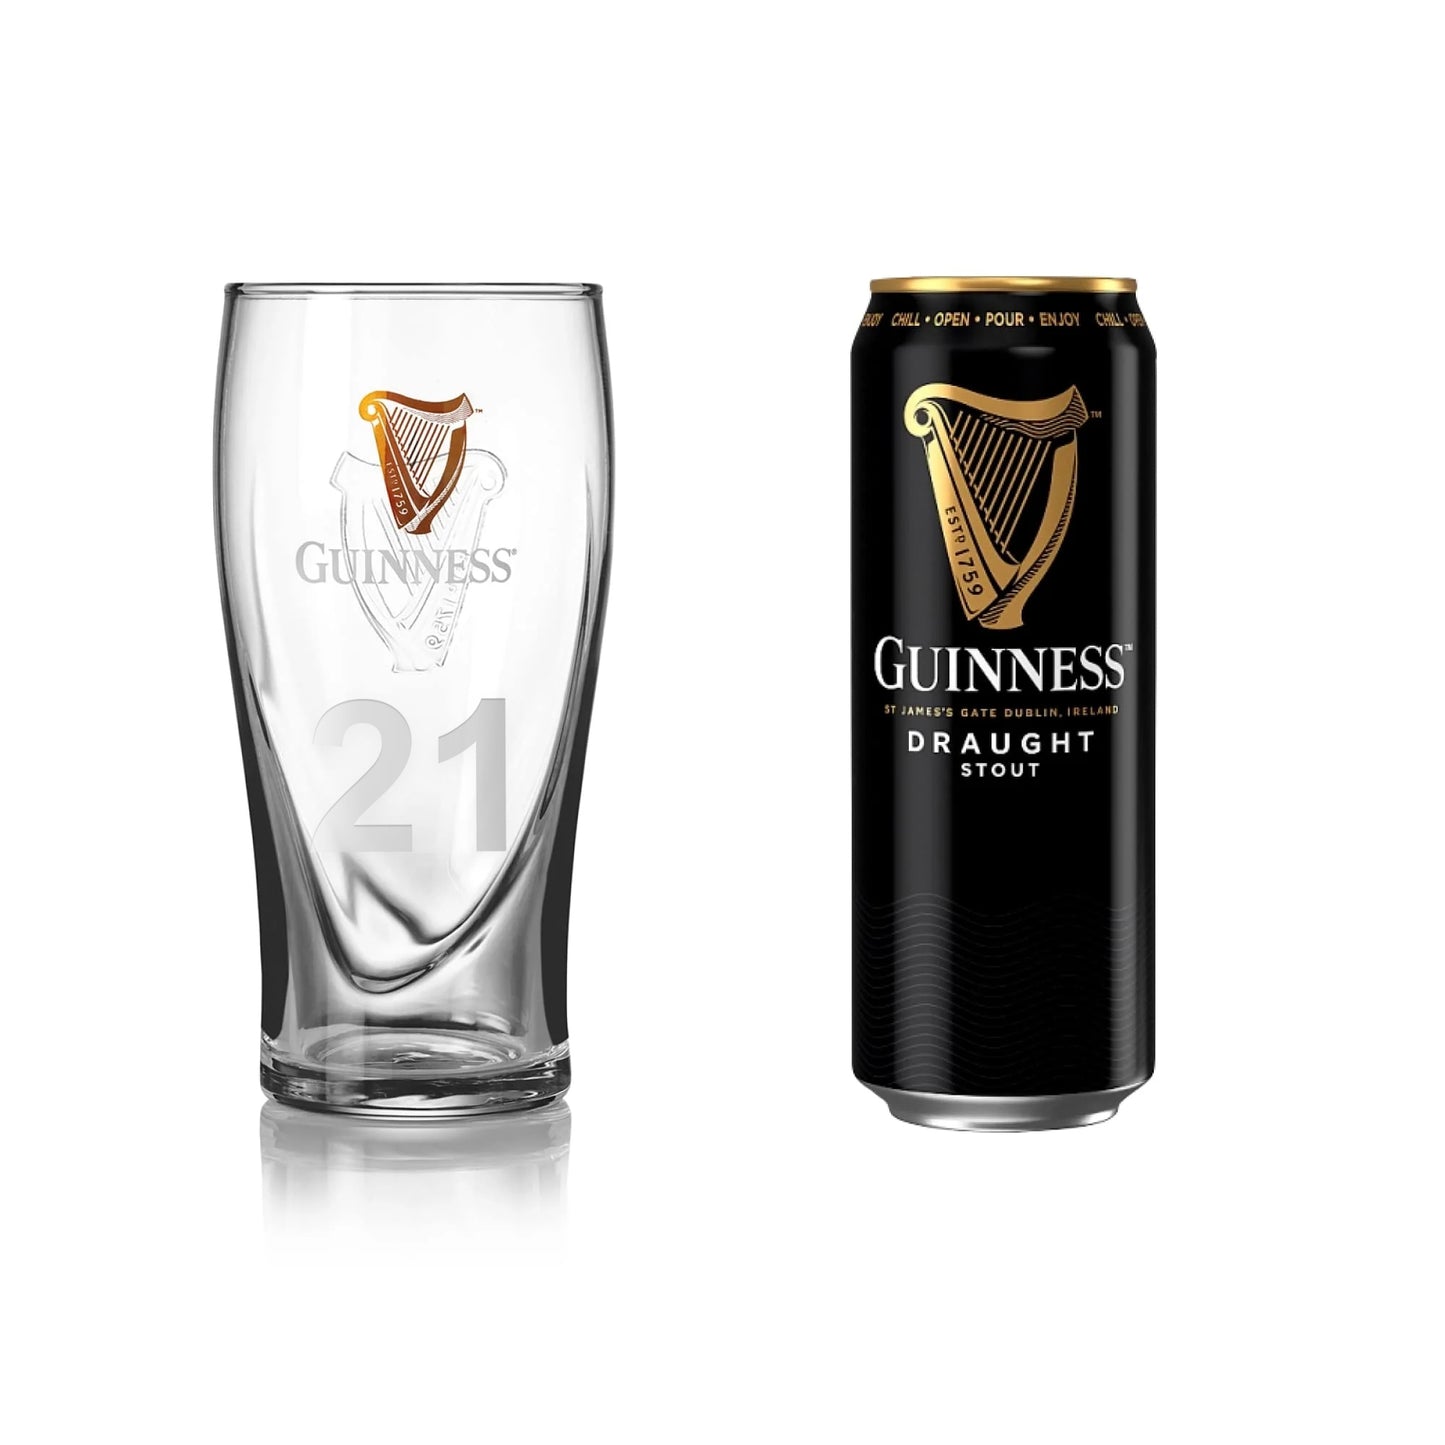 A Guinness UK-branded pint glass from a Guinness UK pint glass set beside a can of Guinness UK draught beer, perfect for any beer lover.